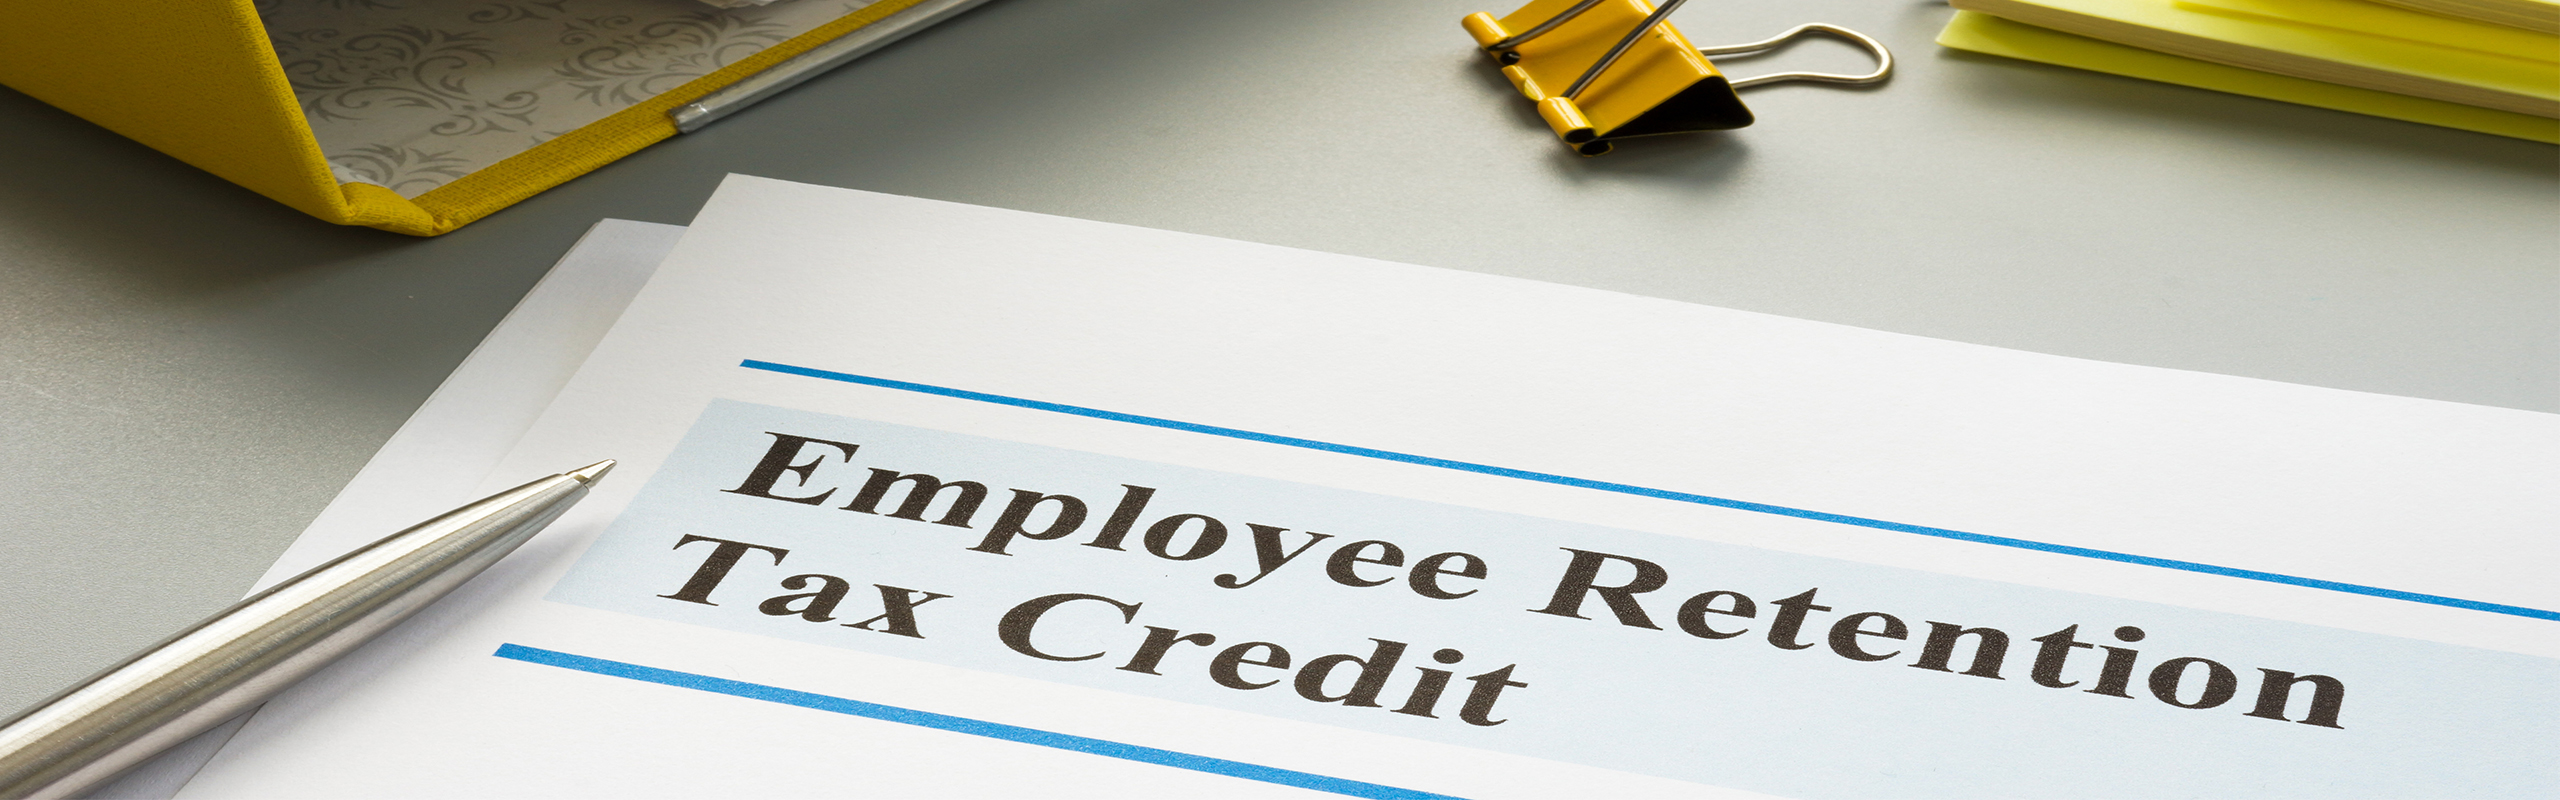 take-advantage-of-the-employee-retention-tax-credit-before-it-is-too-late